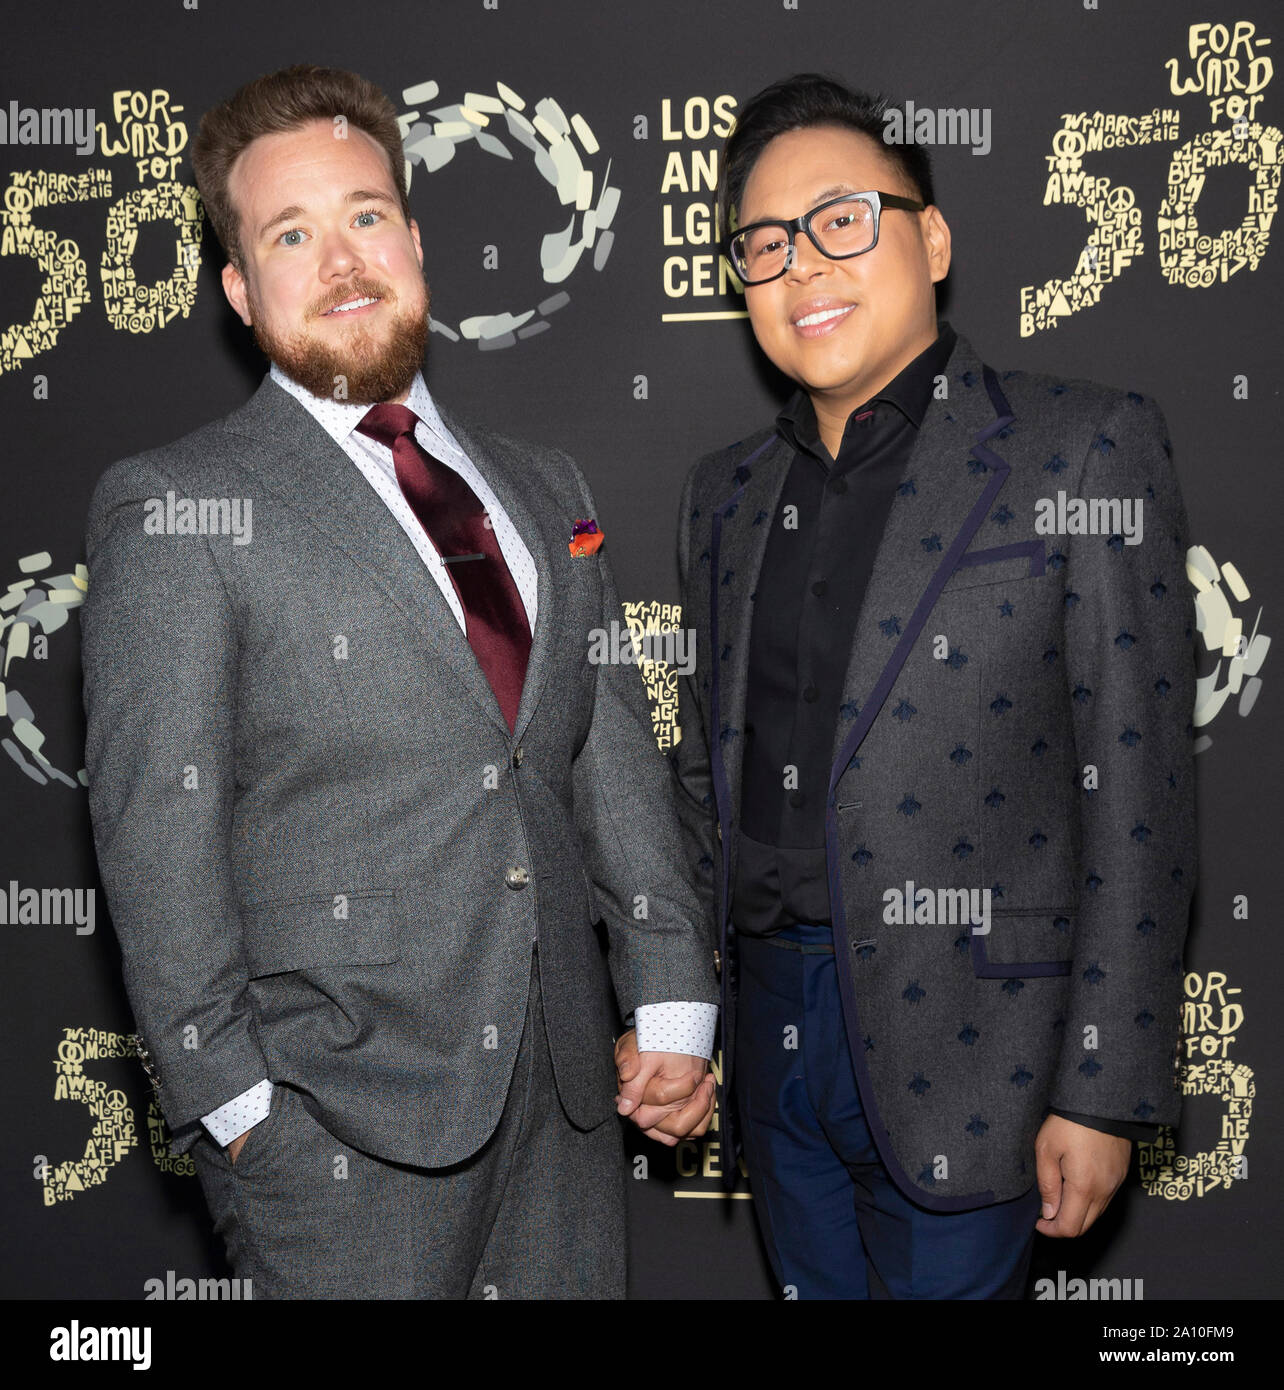 Los Angeles, CA - Sept 21, 2019: Zeke Smith and Nico Santos attend the Los Angeles LGBT Center's Gold Anniversary Vanguard Celebration 'Hearts Of Gold Stock Photo